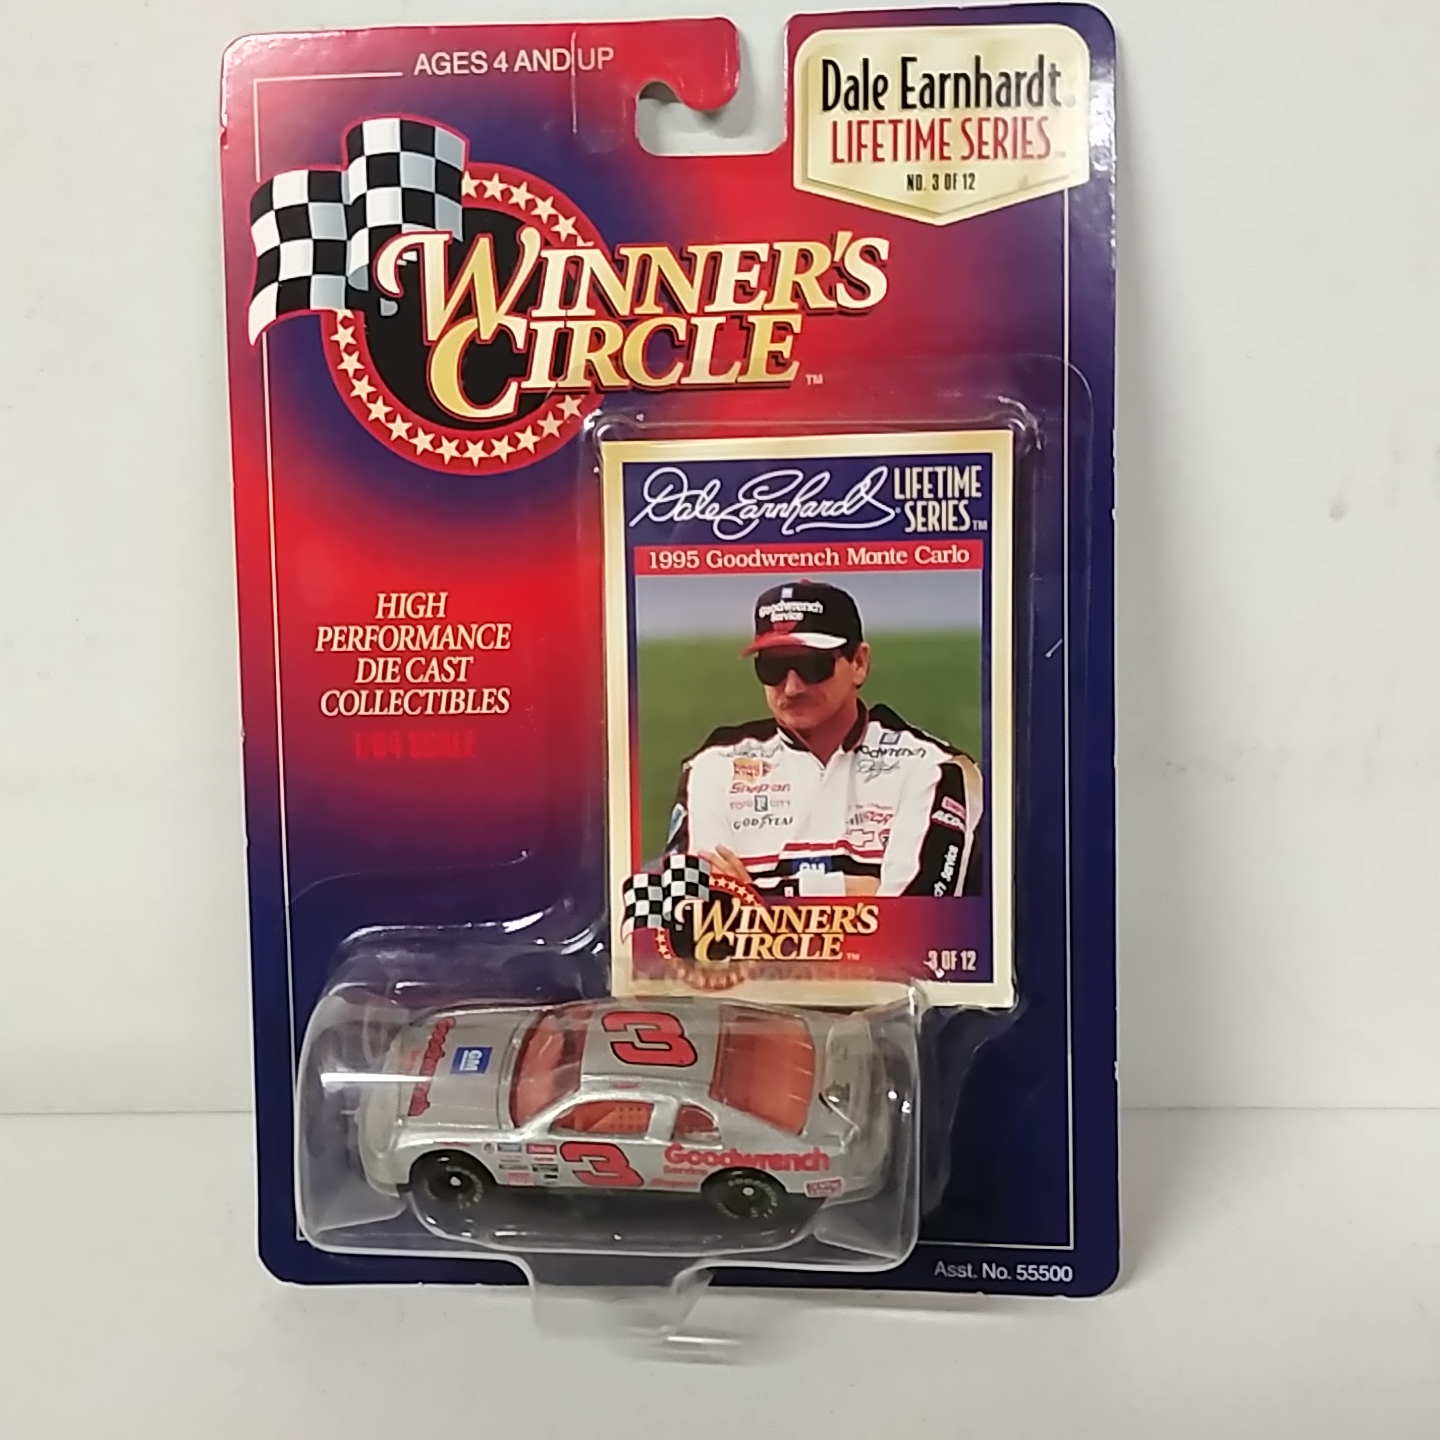 1995 Dale Earnhardt 1/64th Goodwrench "Silver" car